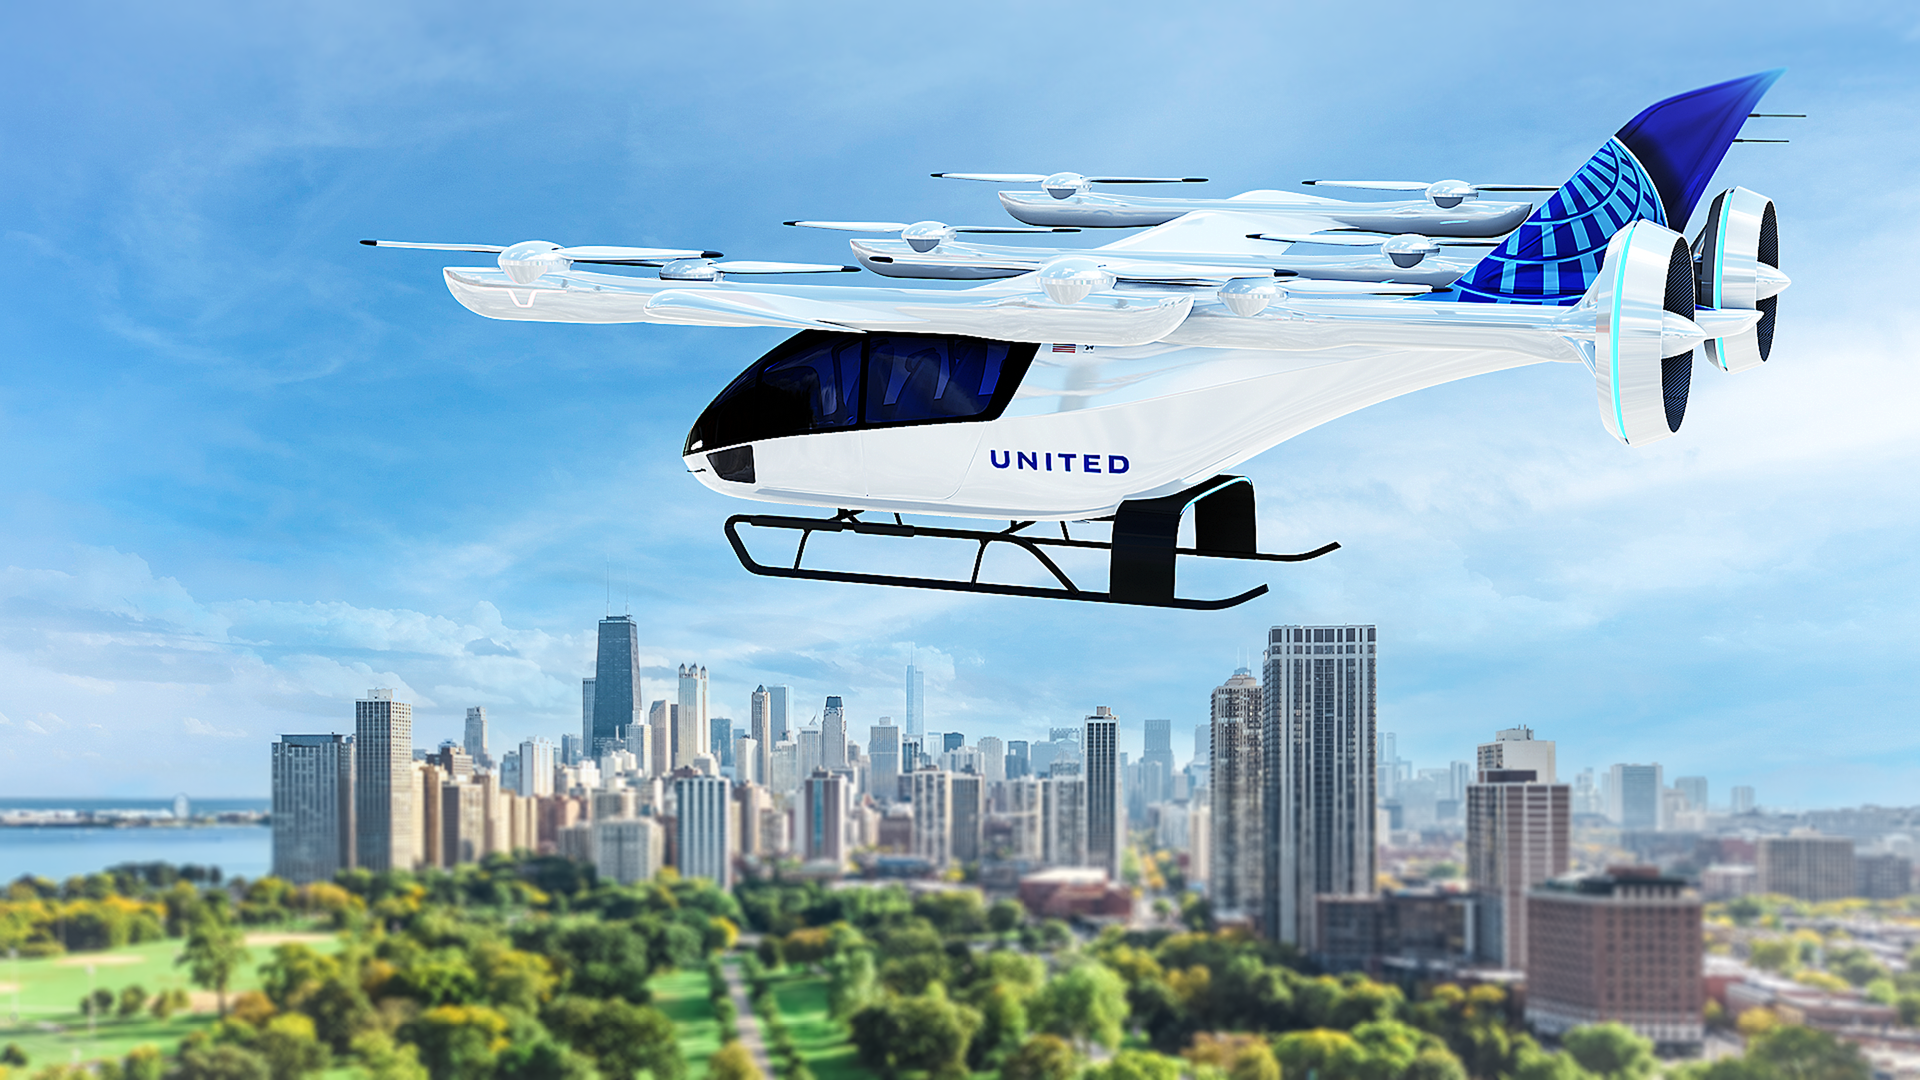 A white eVTOL with a United logo flies above the city of Chicago in an artist's rendering.